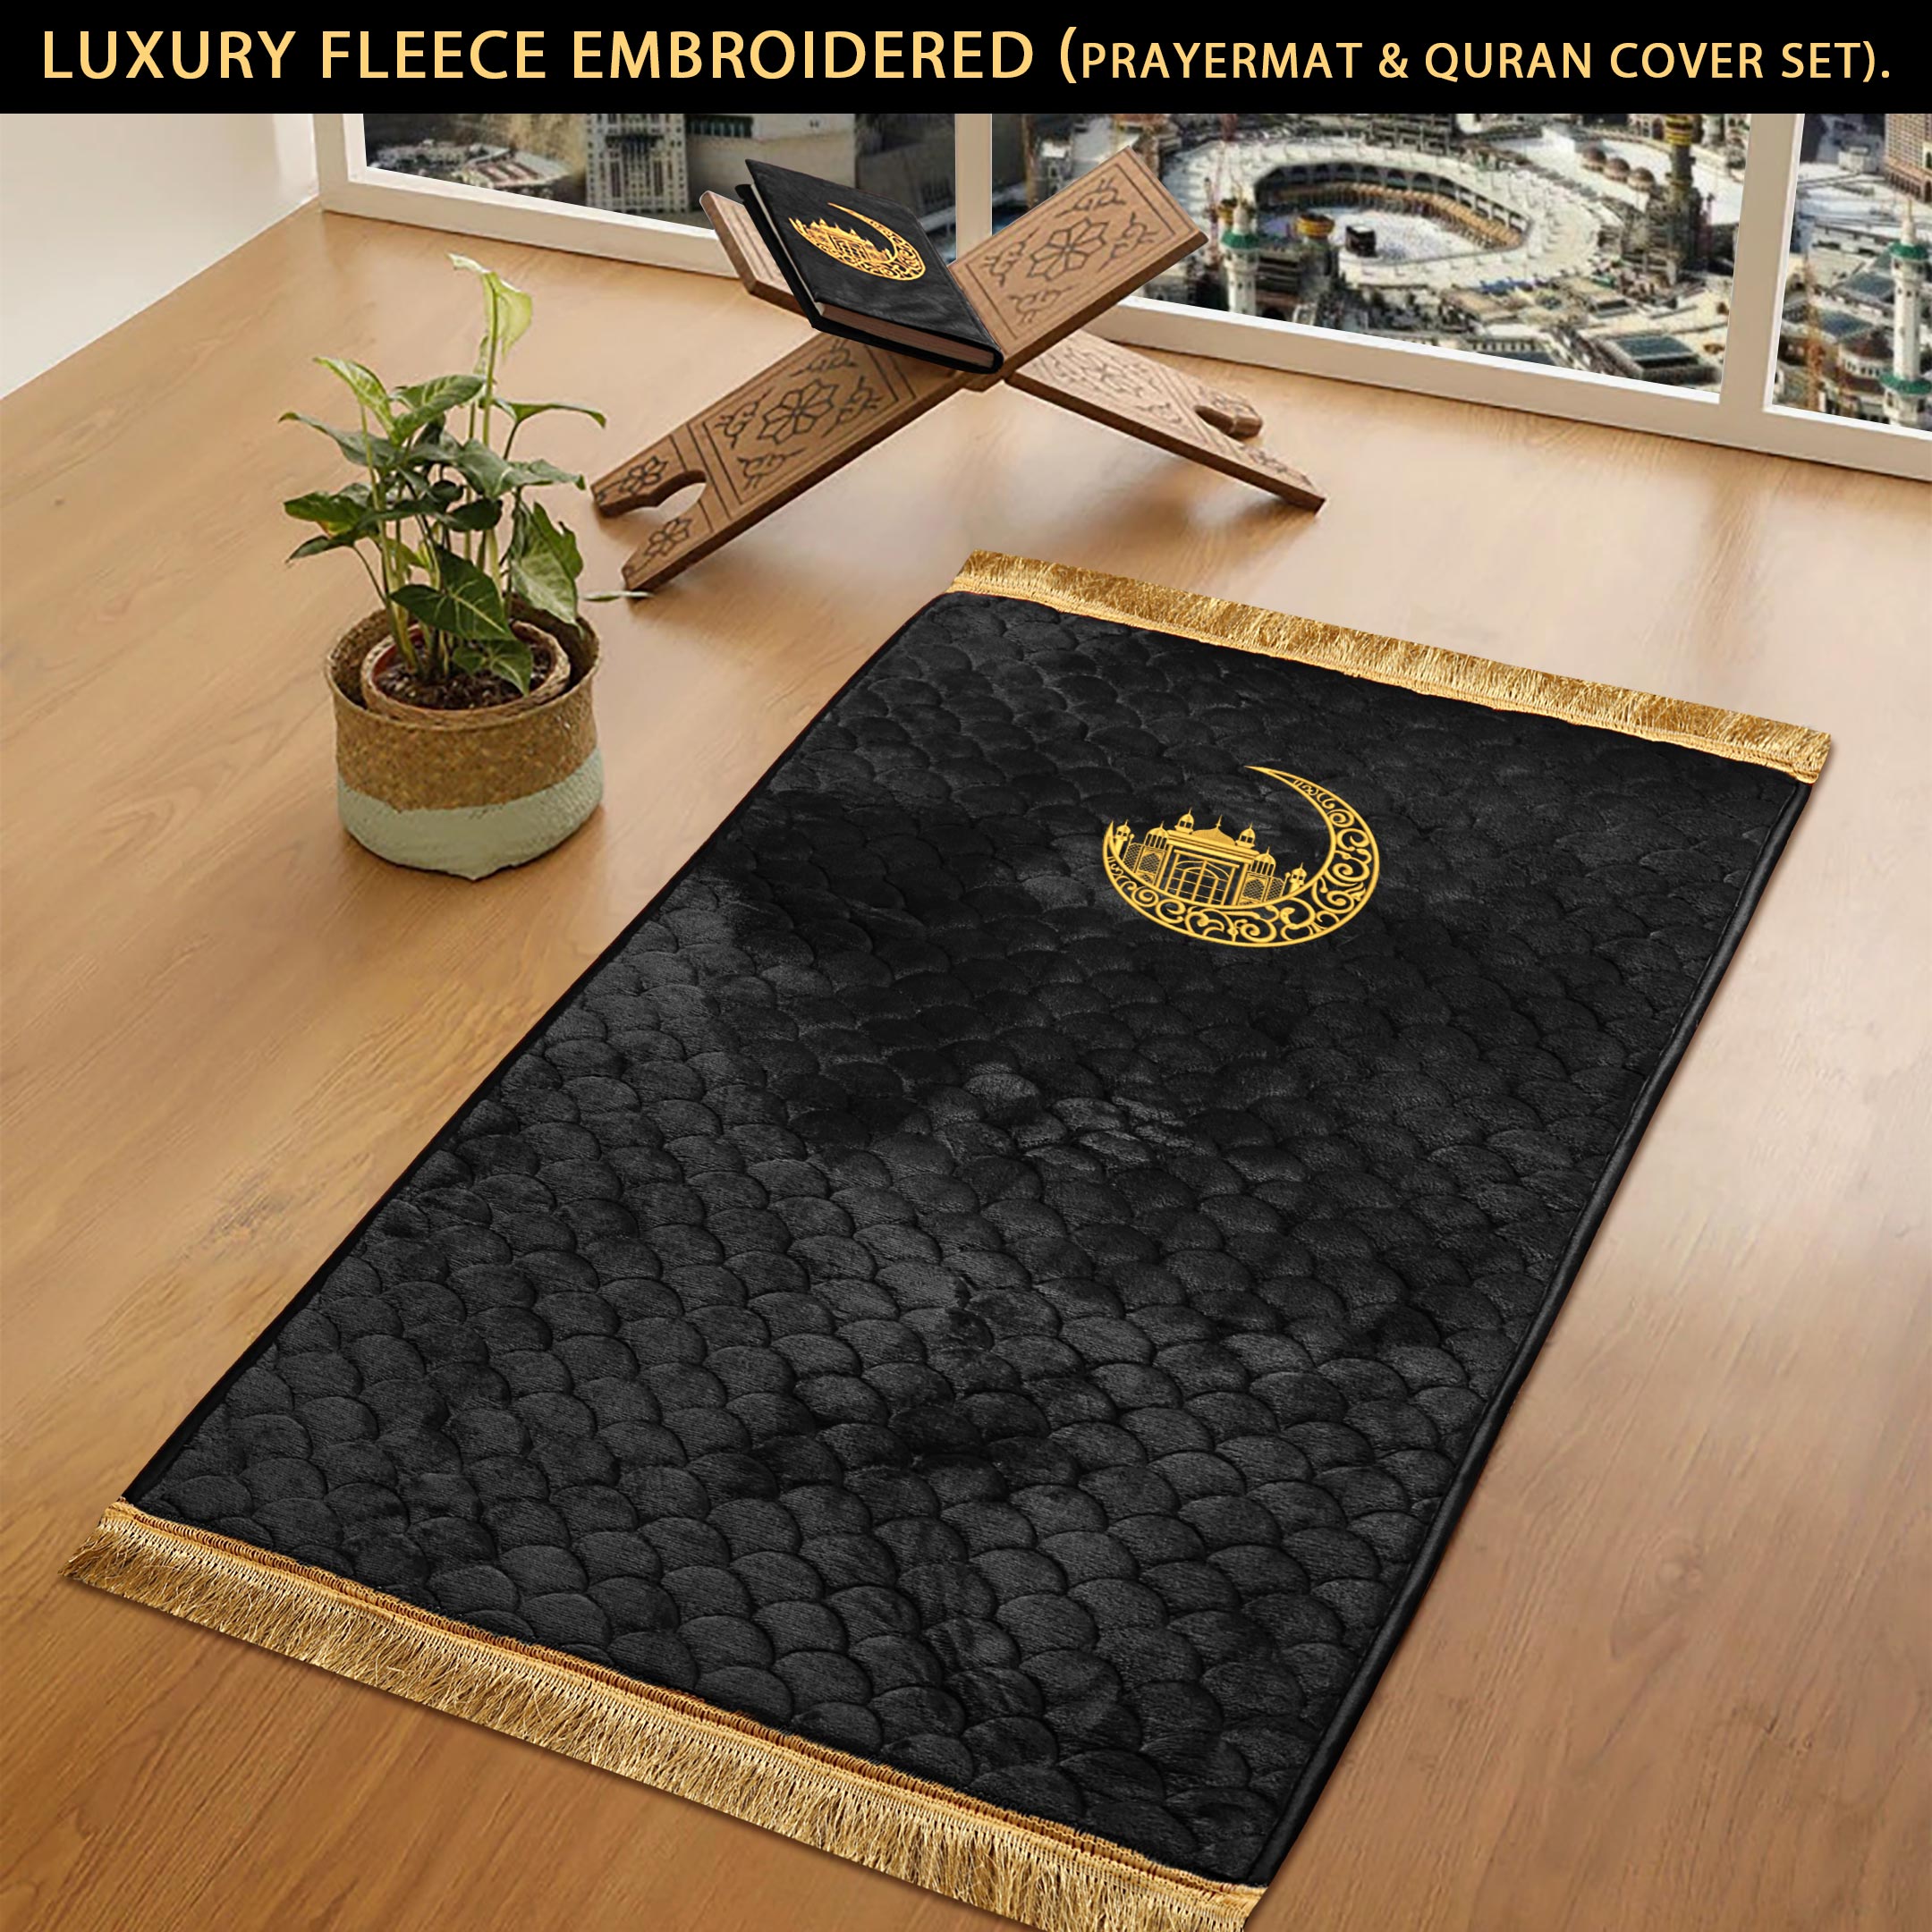 Black Seashell Quilted Moon Embroidered Fleece Padded Prayermat